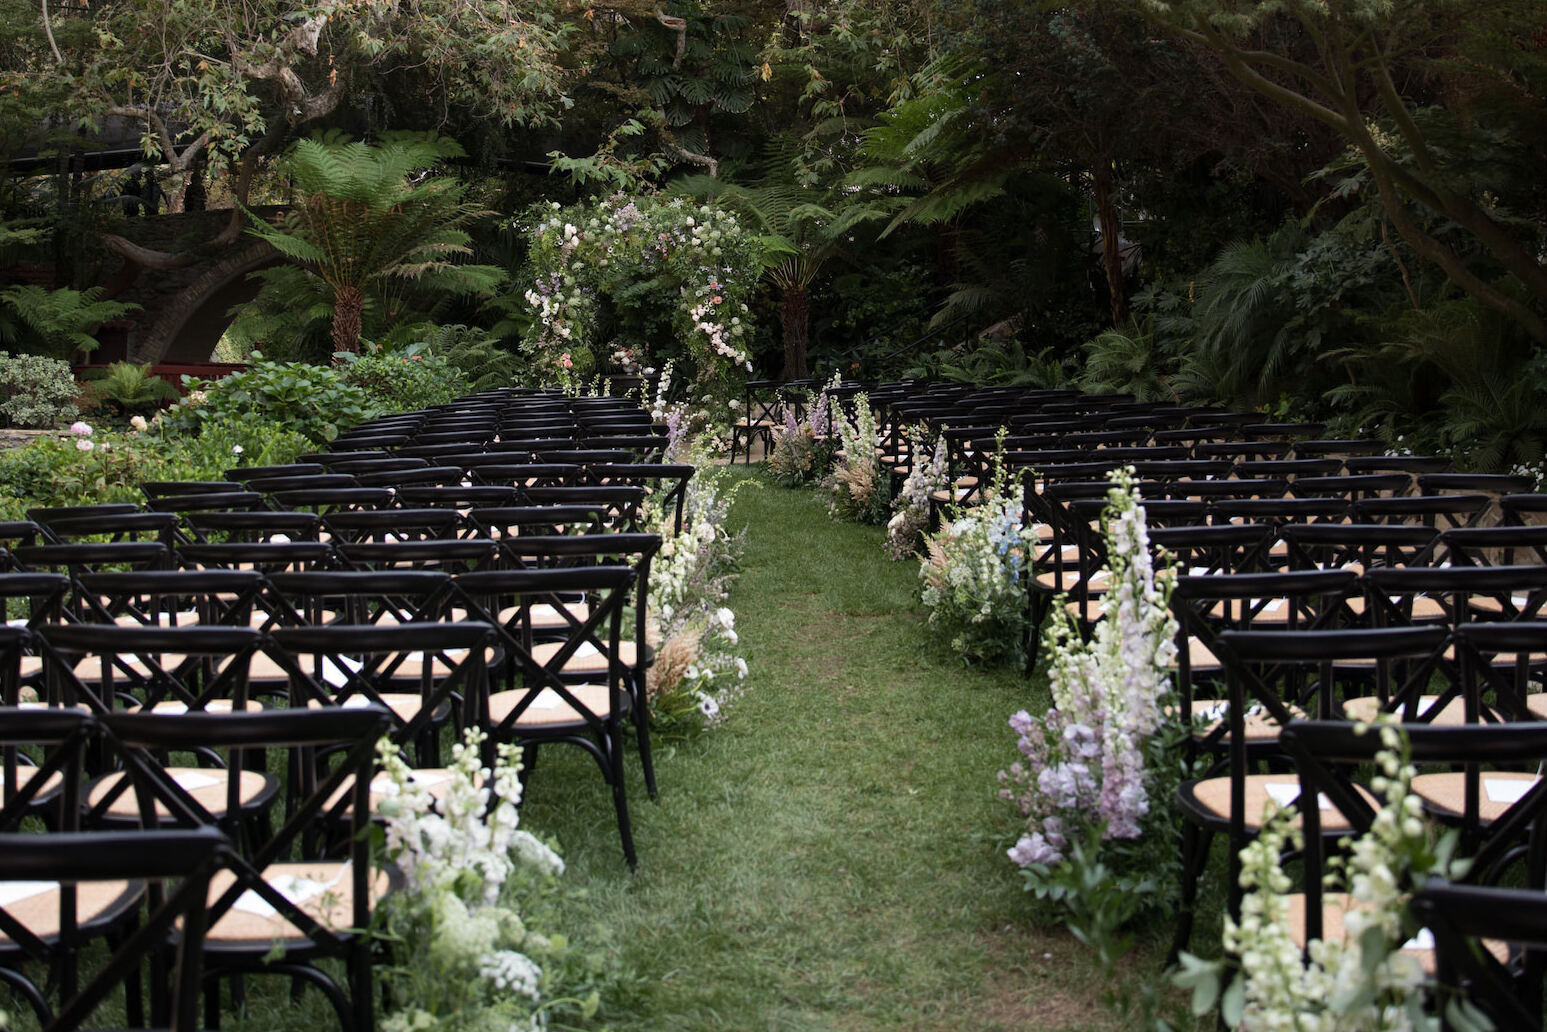 Celebrity Wedding: An outdoor ceremony setup with black chairs and floral arrangements along the aisle, leading up to an arch.